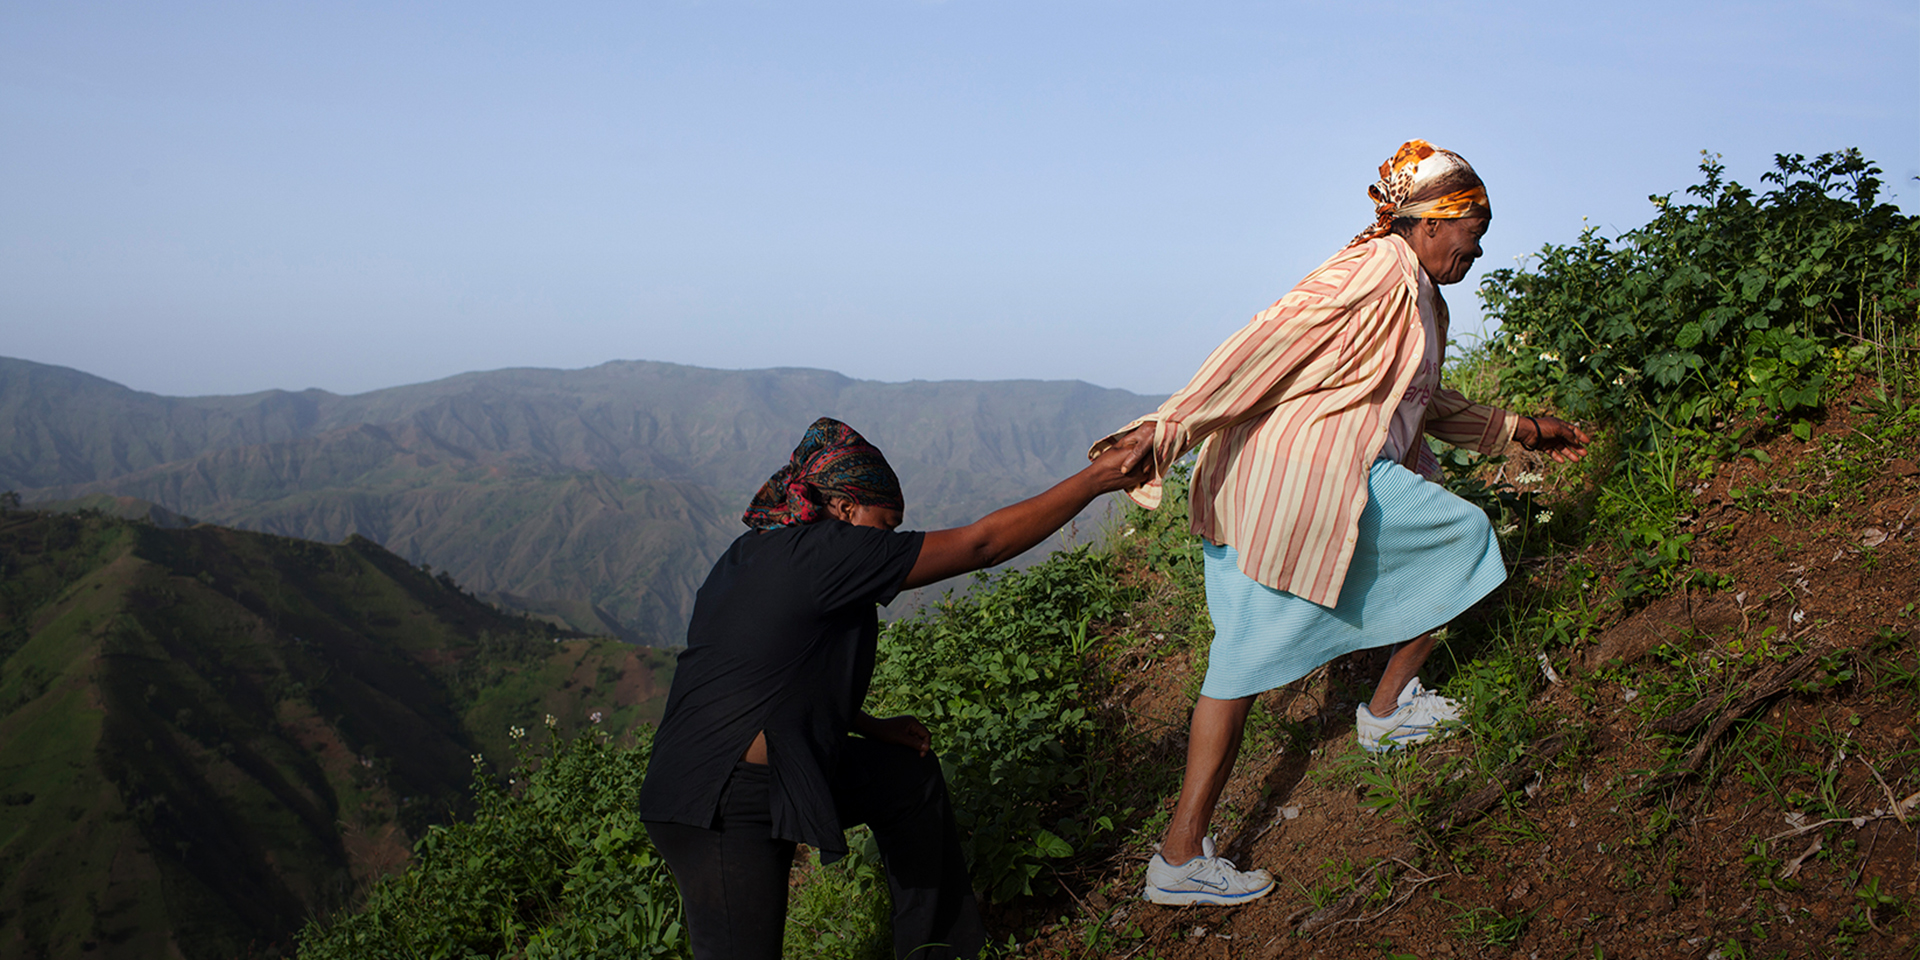 Two women walking up a steep hill. The one in front is helping the other behind her by providing her hand as leverage.